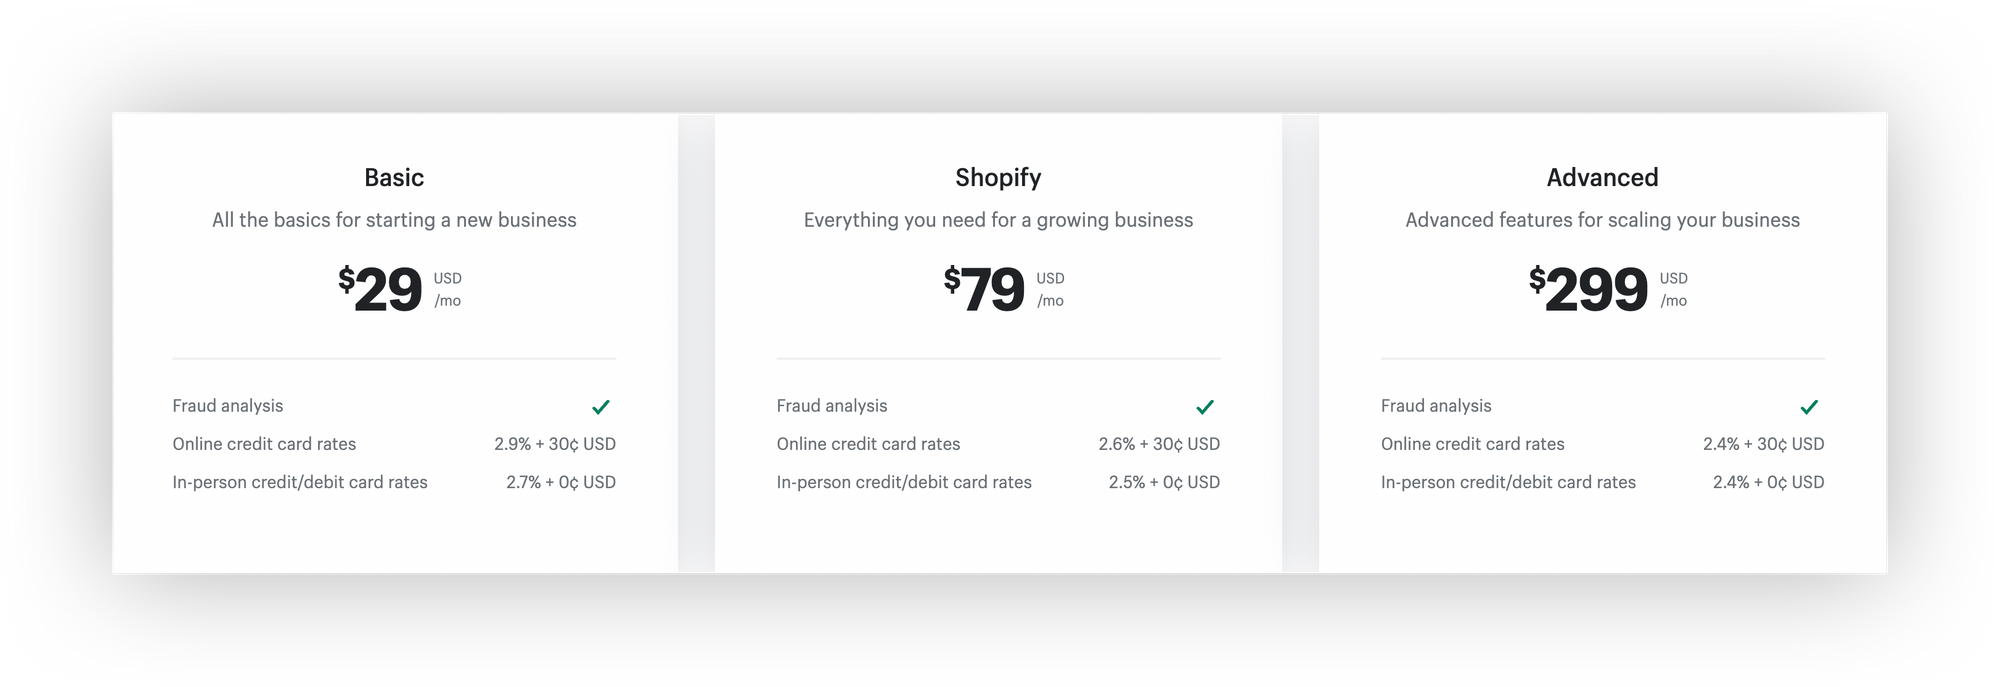 Shopify pricing plans